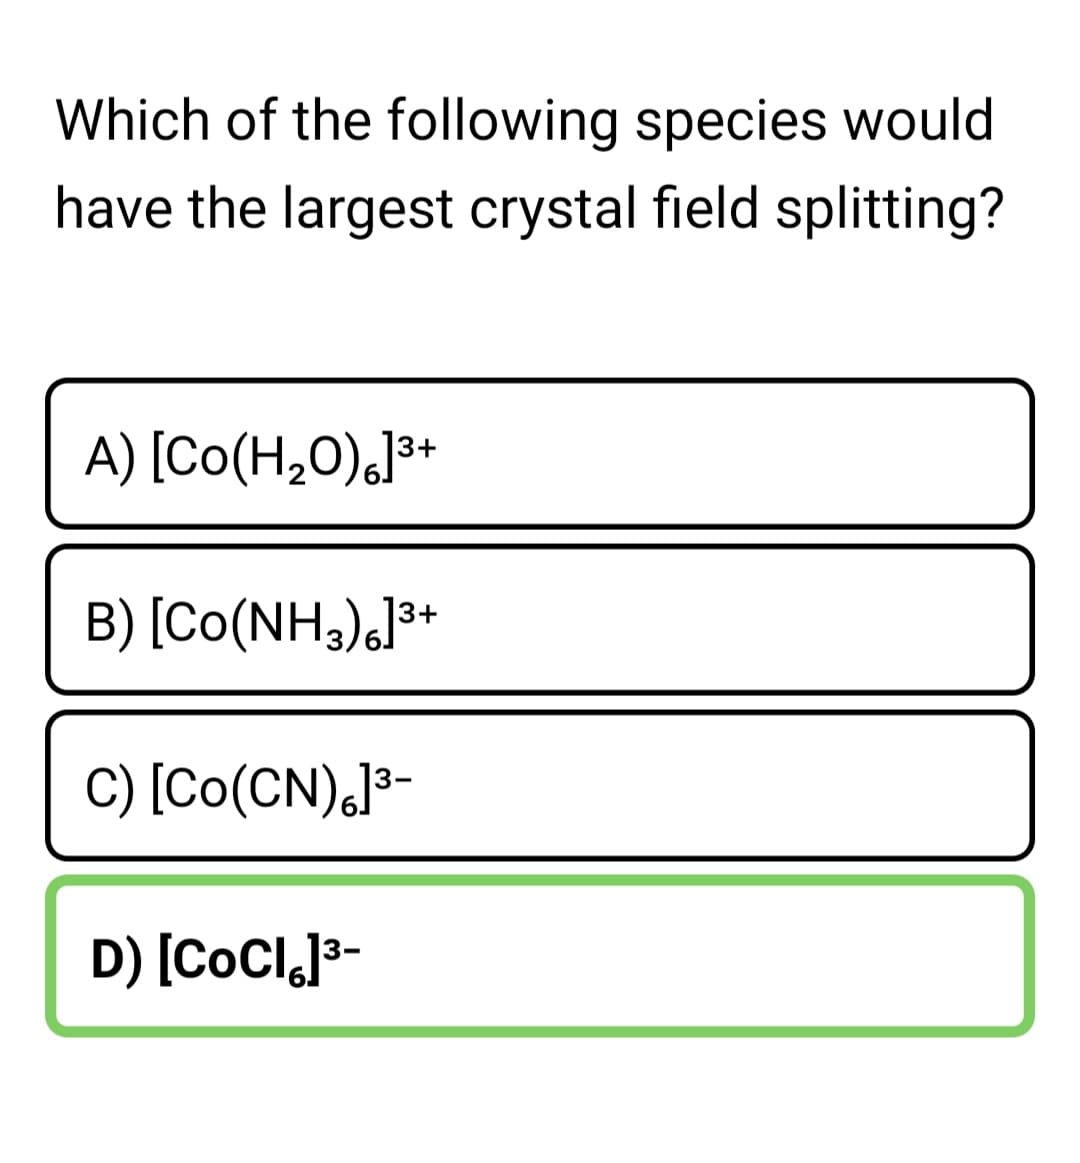 Which of the following species would
have the largest crystal field splitting?
A) [Co(H,0),]³+
B) [Co(NH3),]**
C) [Co(CN),J³-
D) [CoCl,J3-
